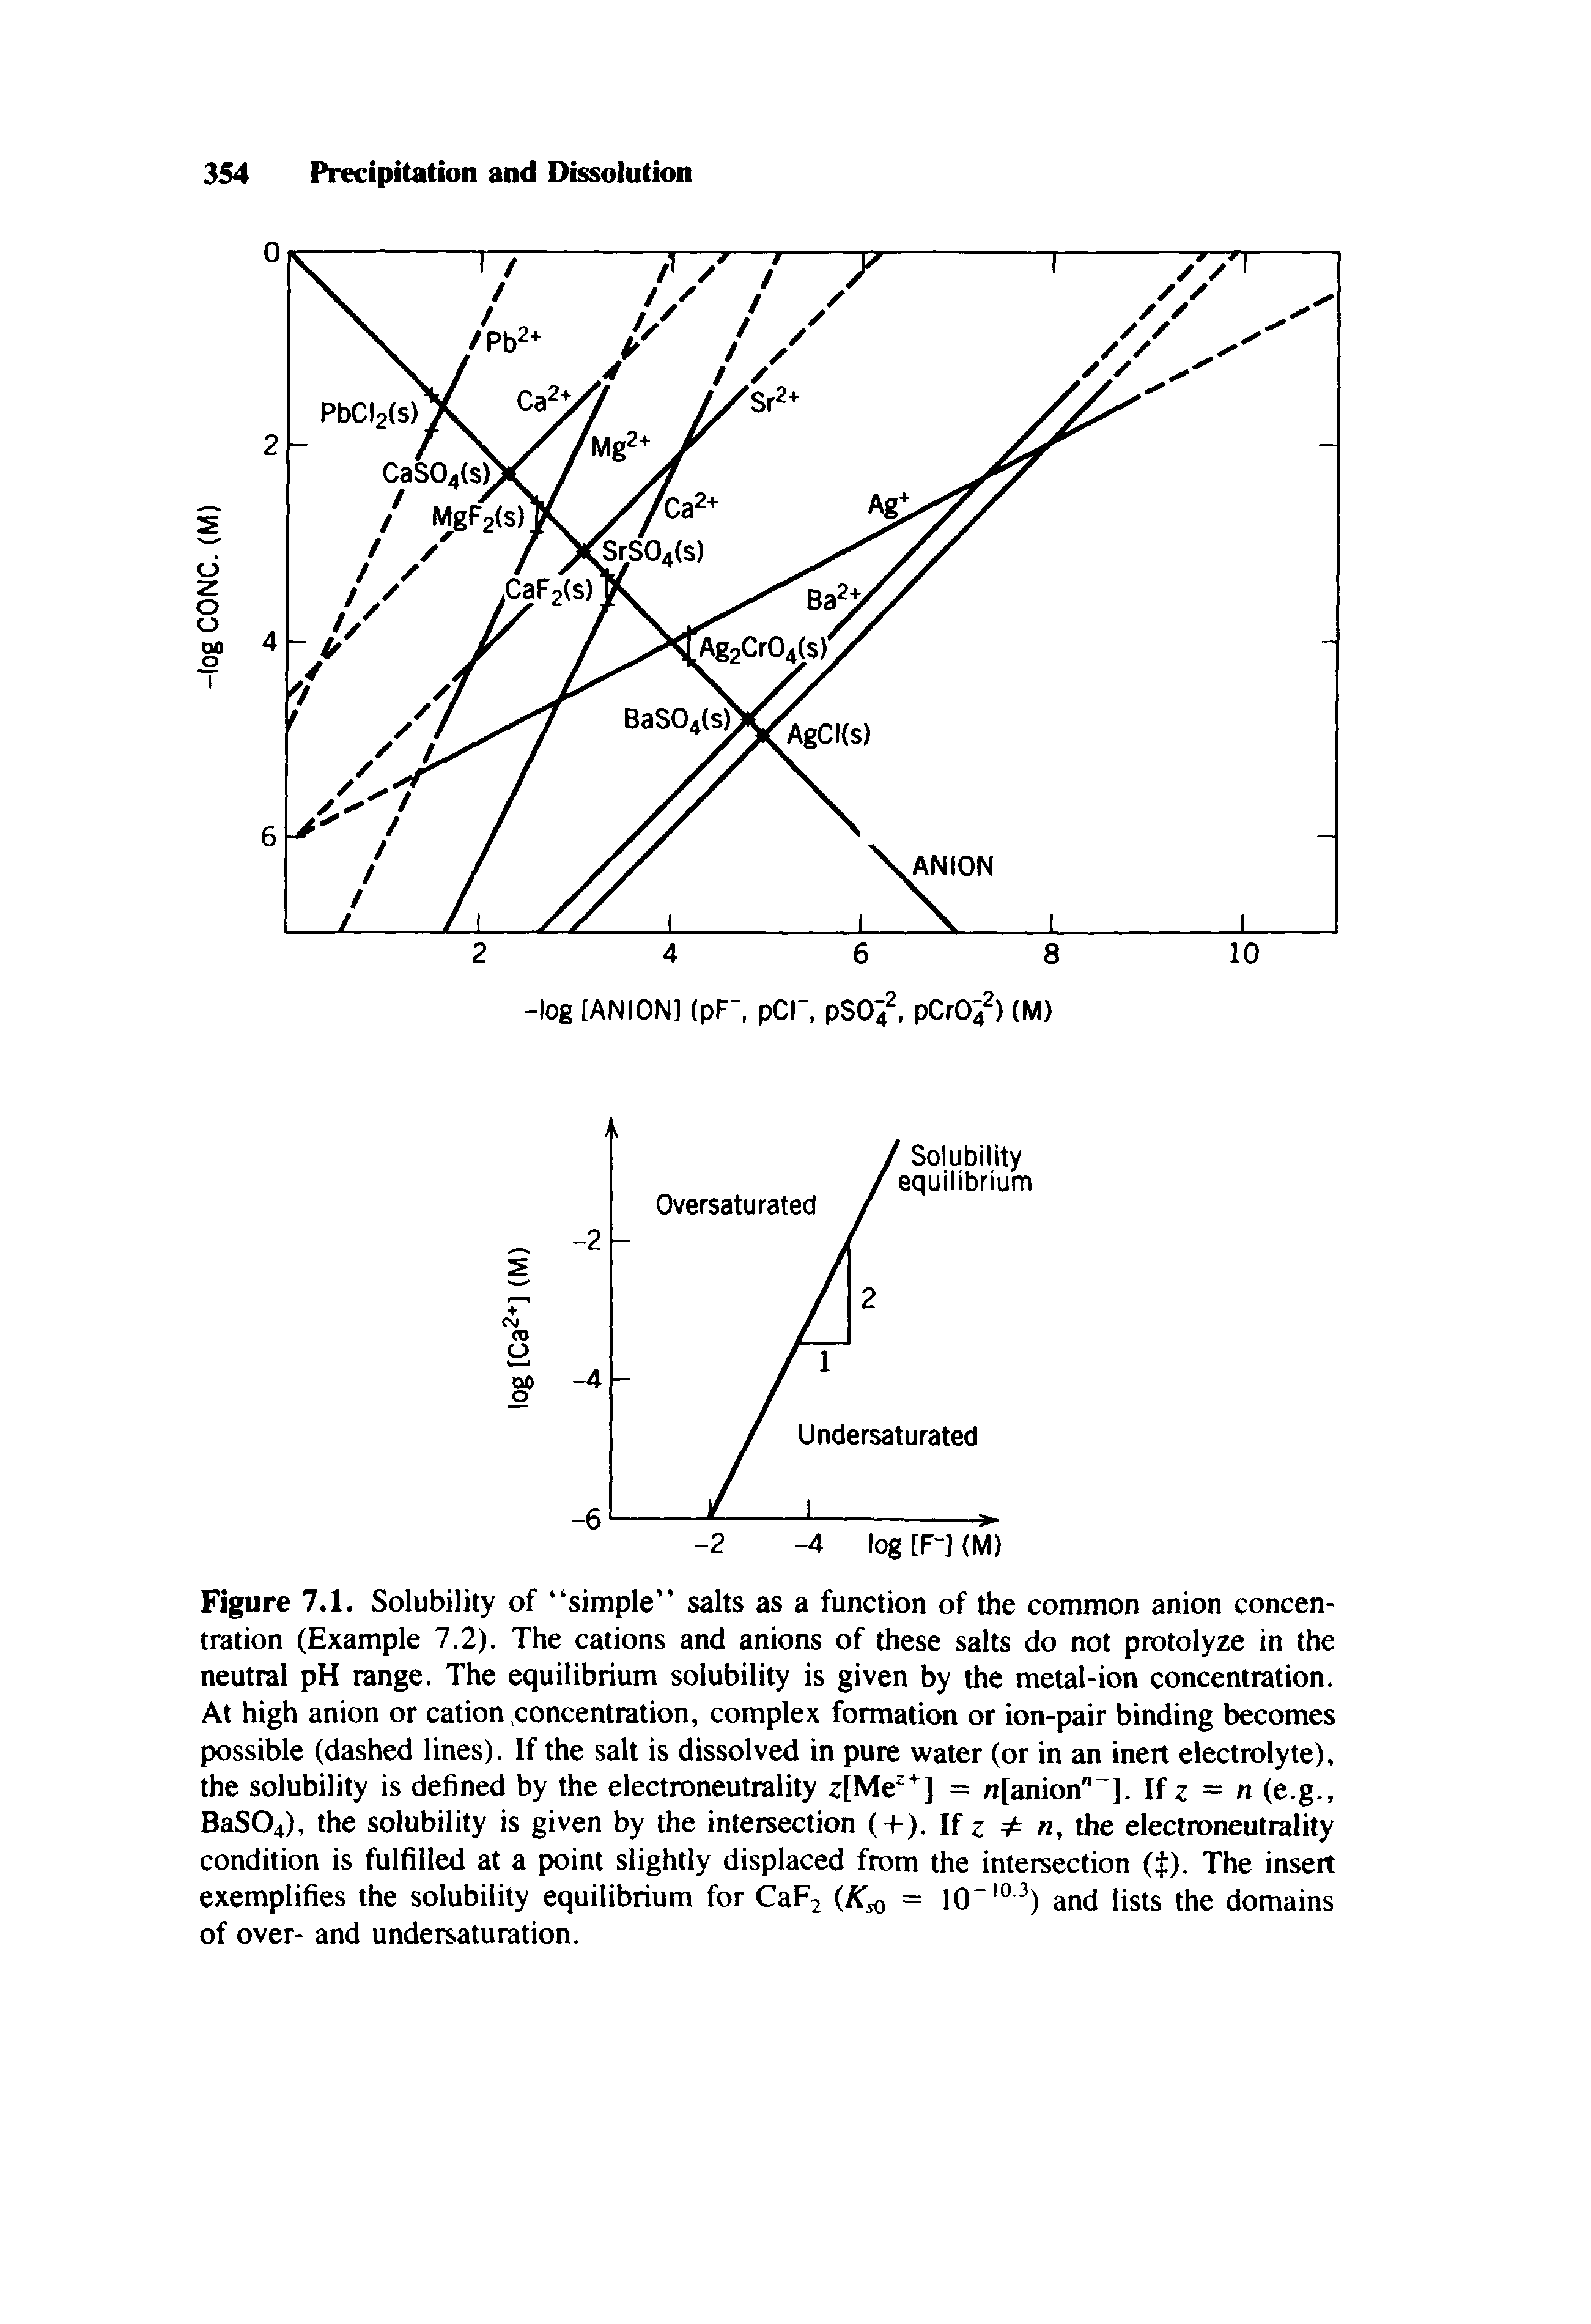 Figure 7.1. Solubility of simple salts as a function of the common anion concentration (Example 7.2). The cations and anions of these salts do not protolyze in the neutral pH range. The equilibrium solubility is given by the metal-ion concentration. At high anion or cation concentration, complex formation or ion-pair binding becomes possible (dashed lines). If the salt is dissolved in pure water (or in an inert electrolyte), the solubility is defined by the electroneutrality z[Me" J = /i[anion ]. If z = n (e.g., BaS04), the solubility is given by the intersection (-I-). If z the electroneutrality condition is fulfilled at a point slightly displaced from the intersection (t). The insert exemplifies the solubility equilibrium for Cap2 ( o = 10" ) and lists the domains of over- and undersaturation.